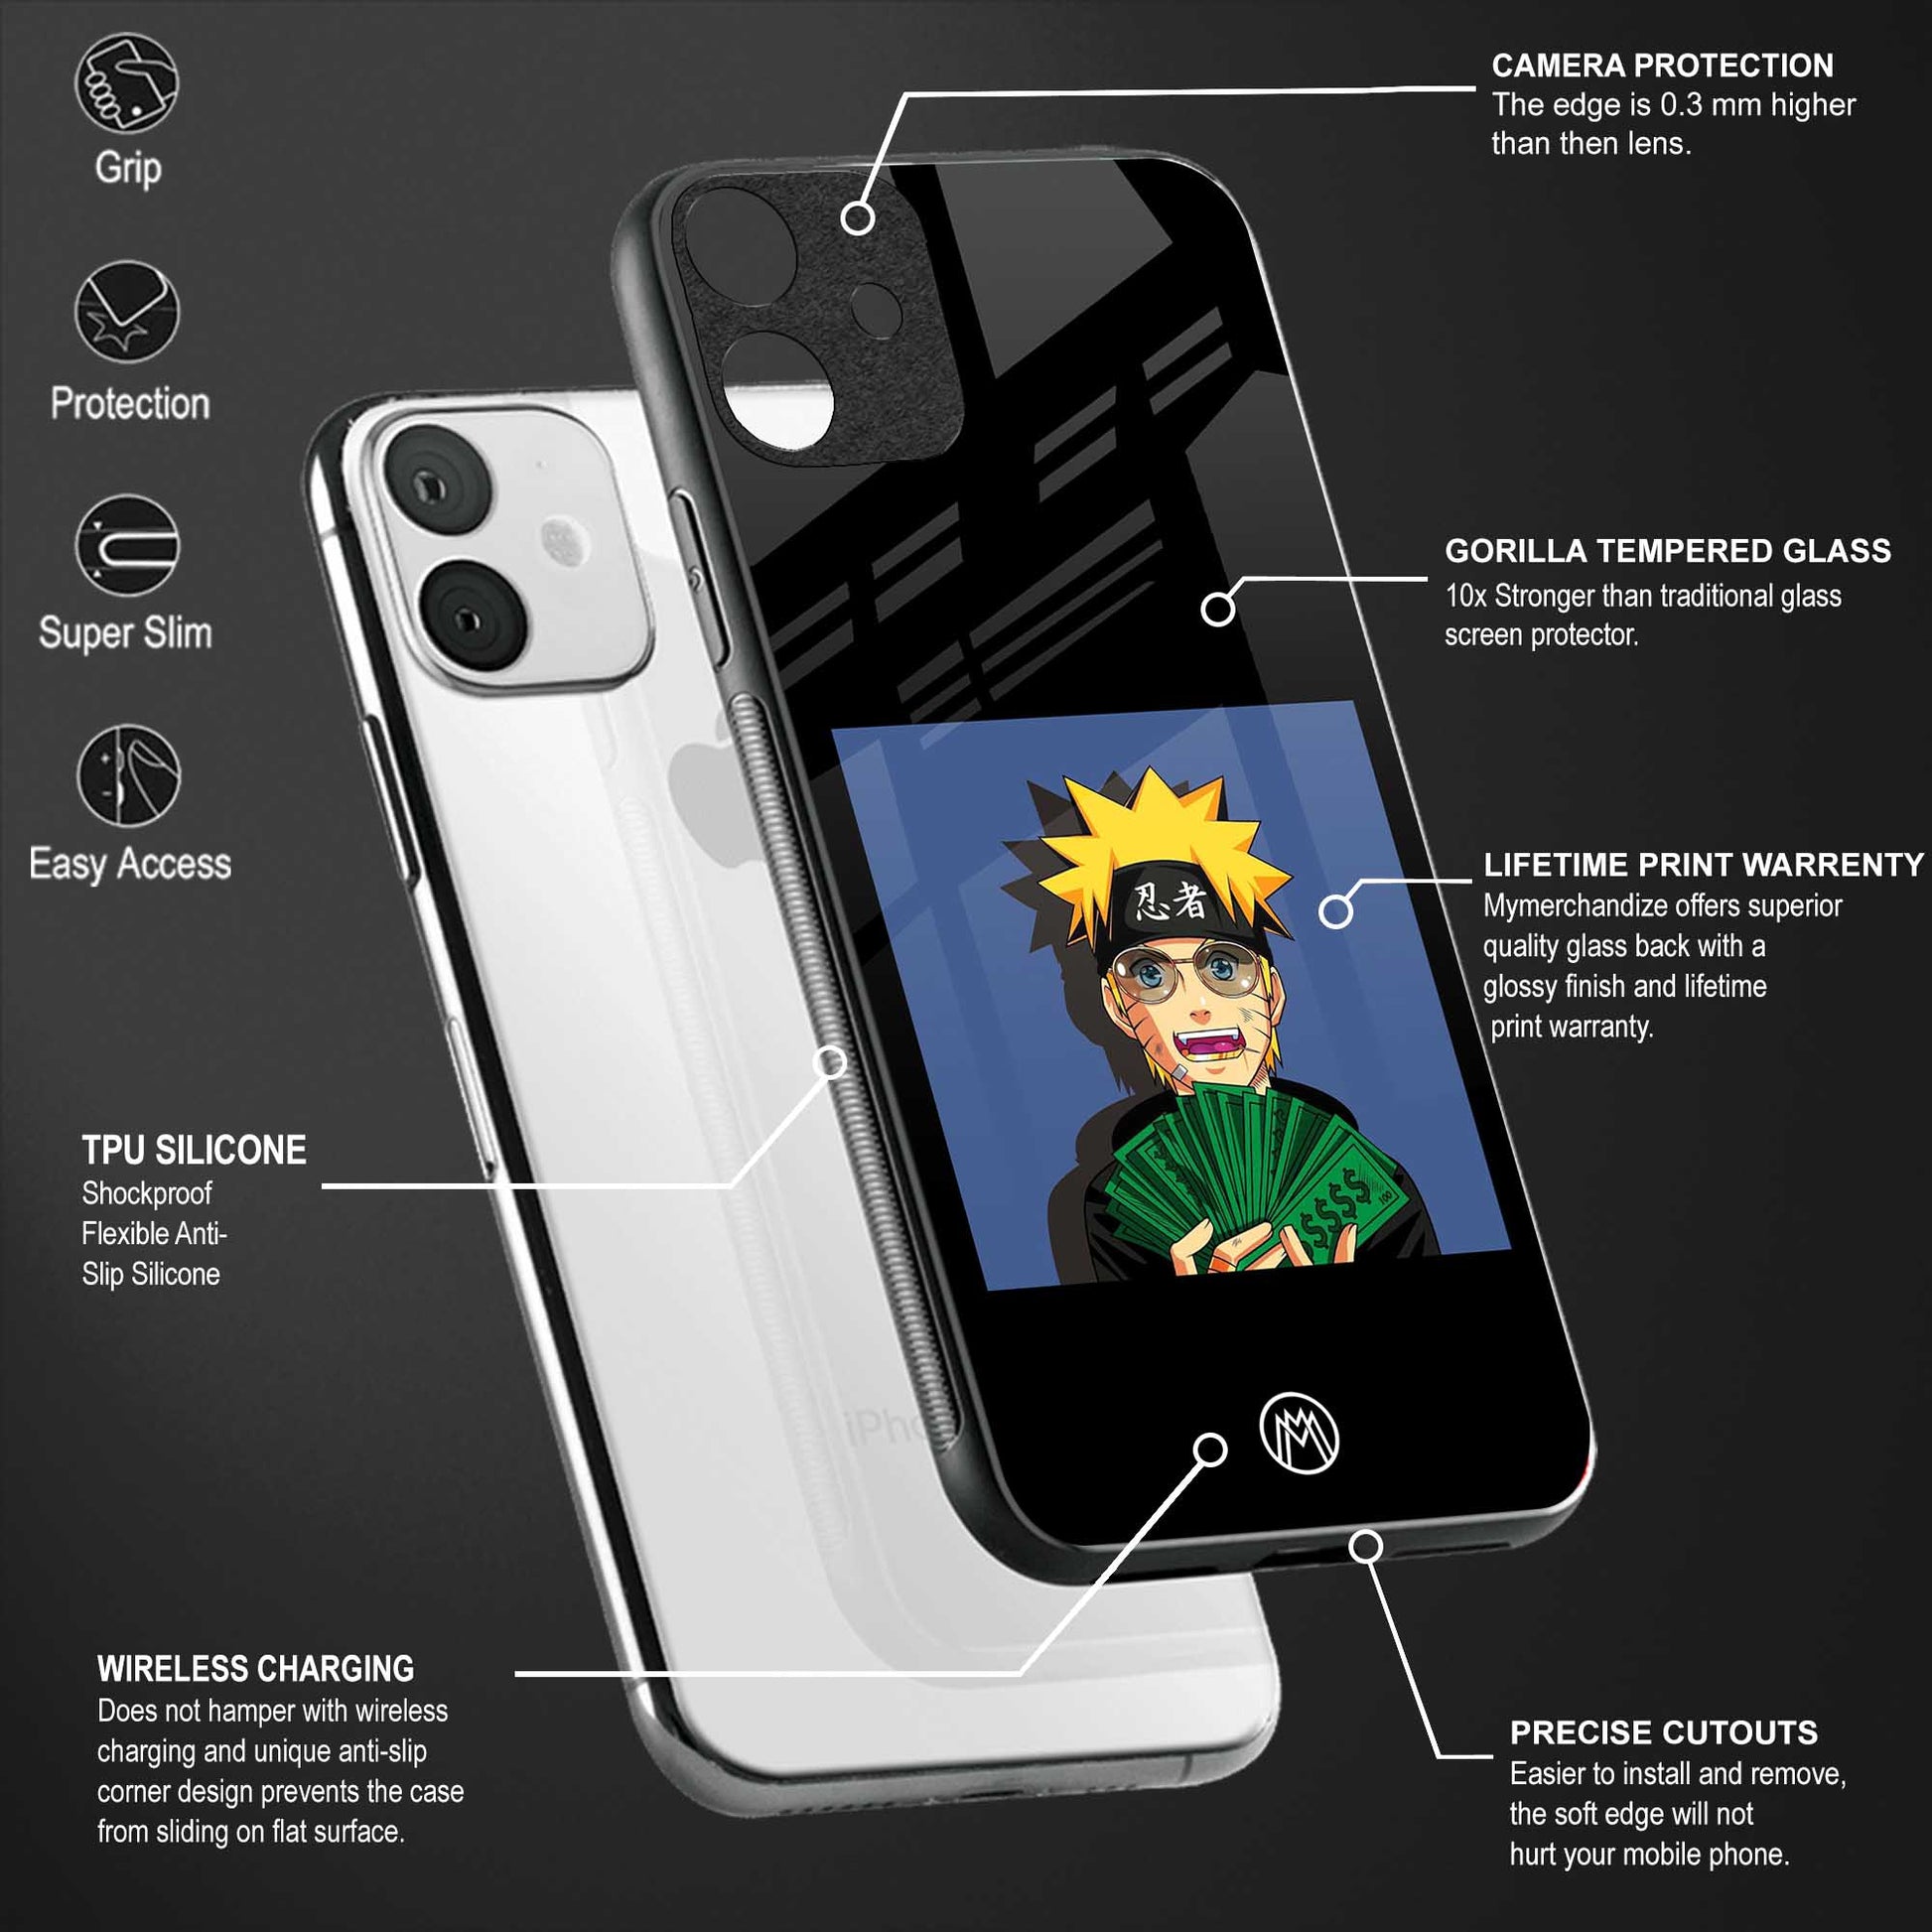 naruto hypebeast back phone cover | glass case for vivo y15c